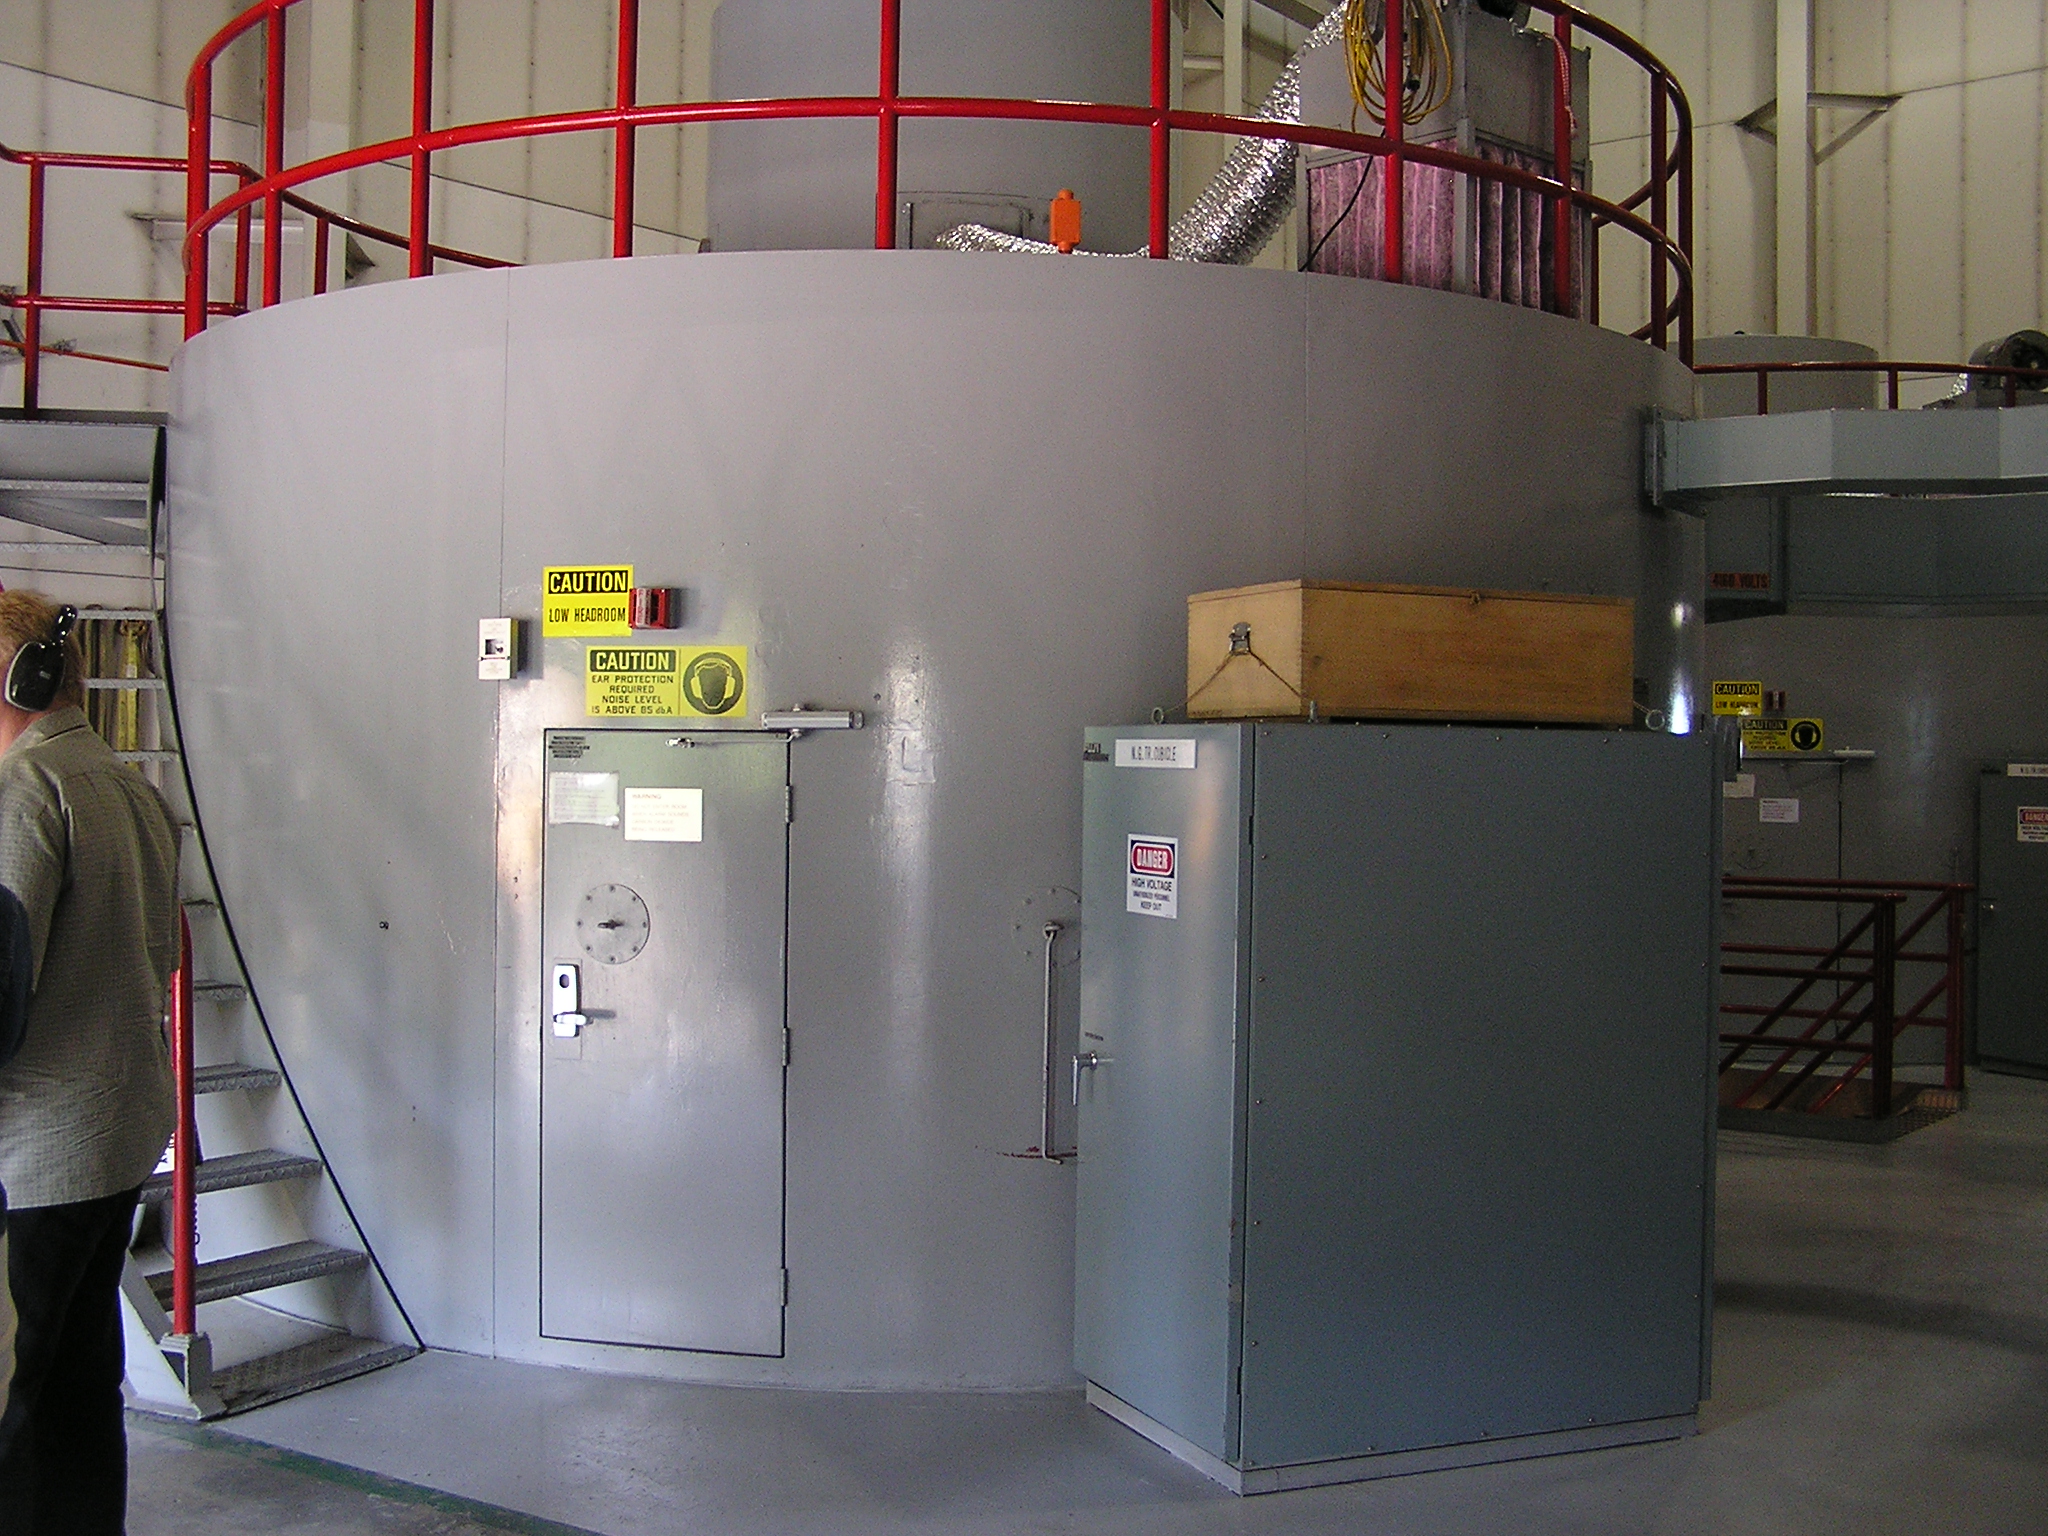 Inside photo of Hydoelectric power plant